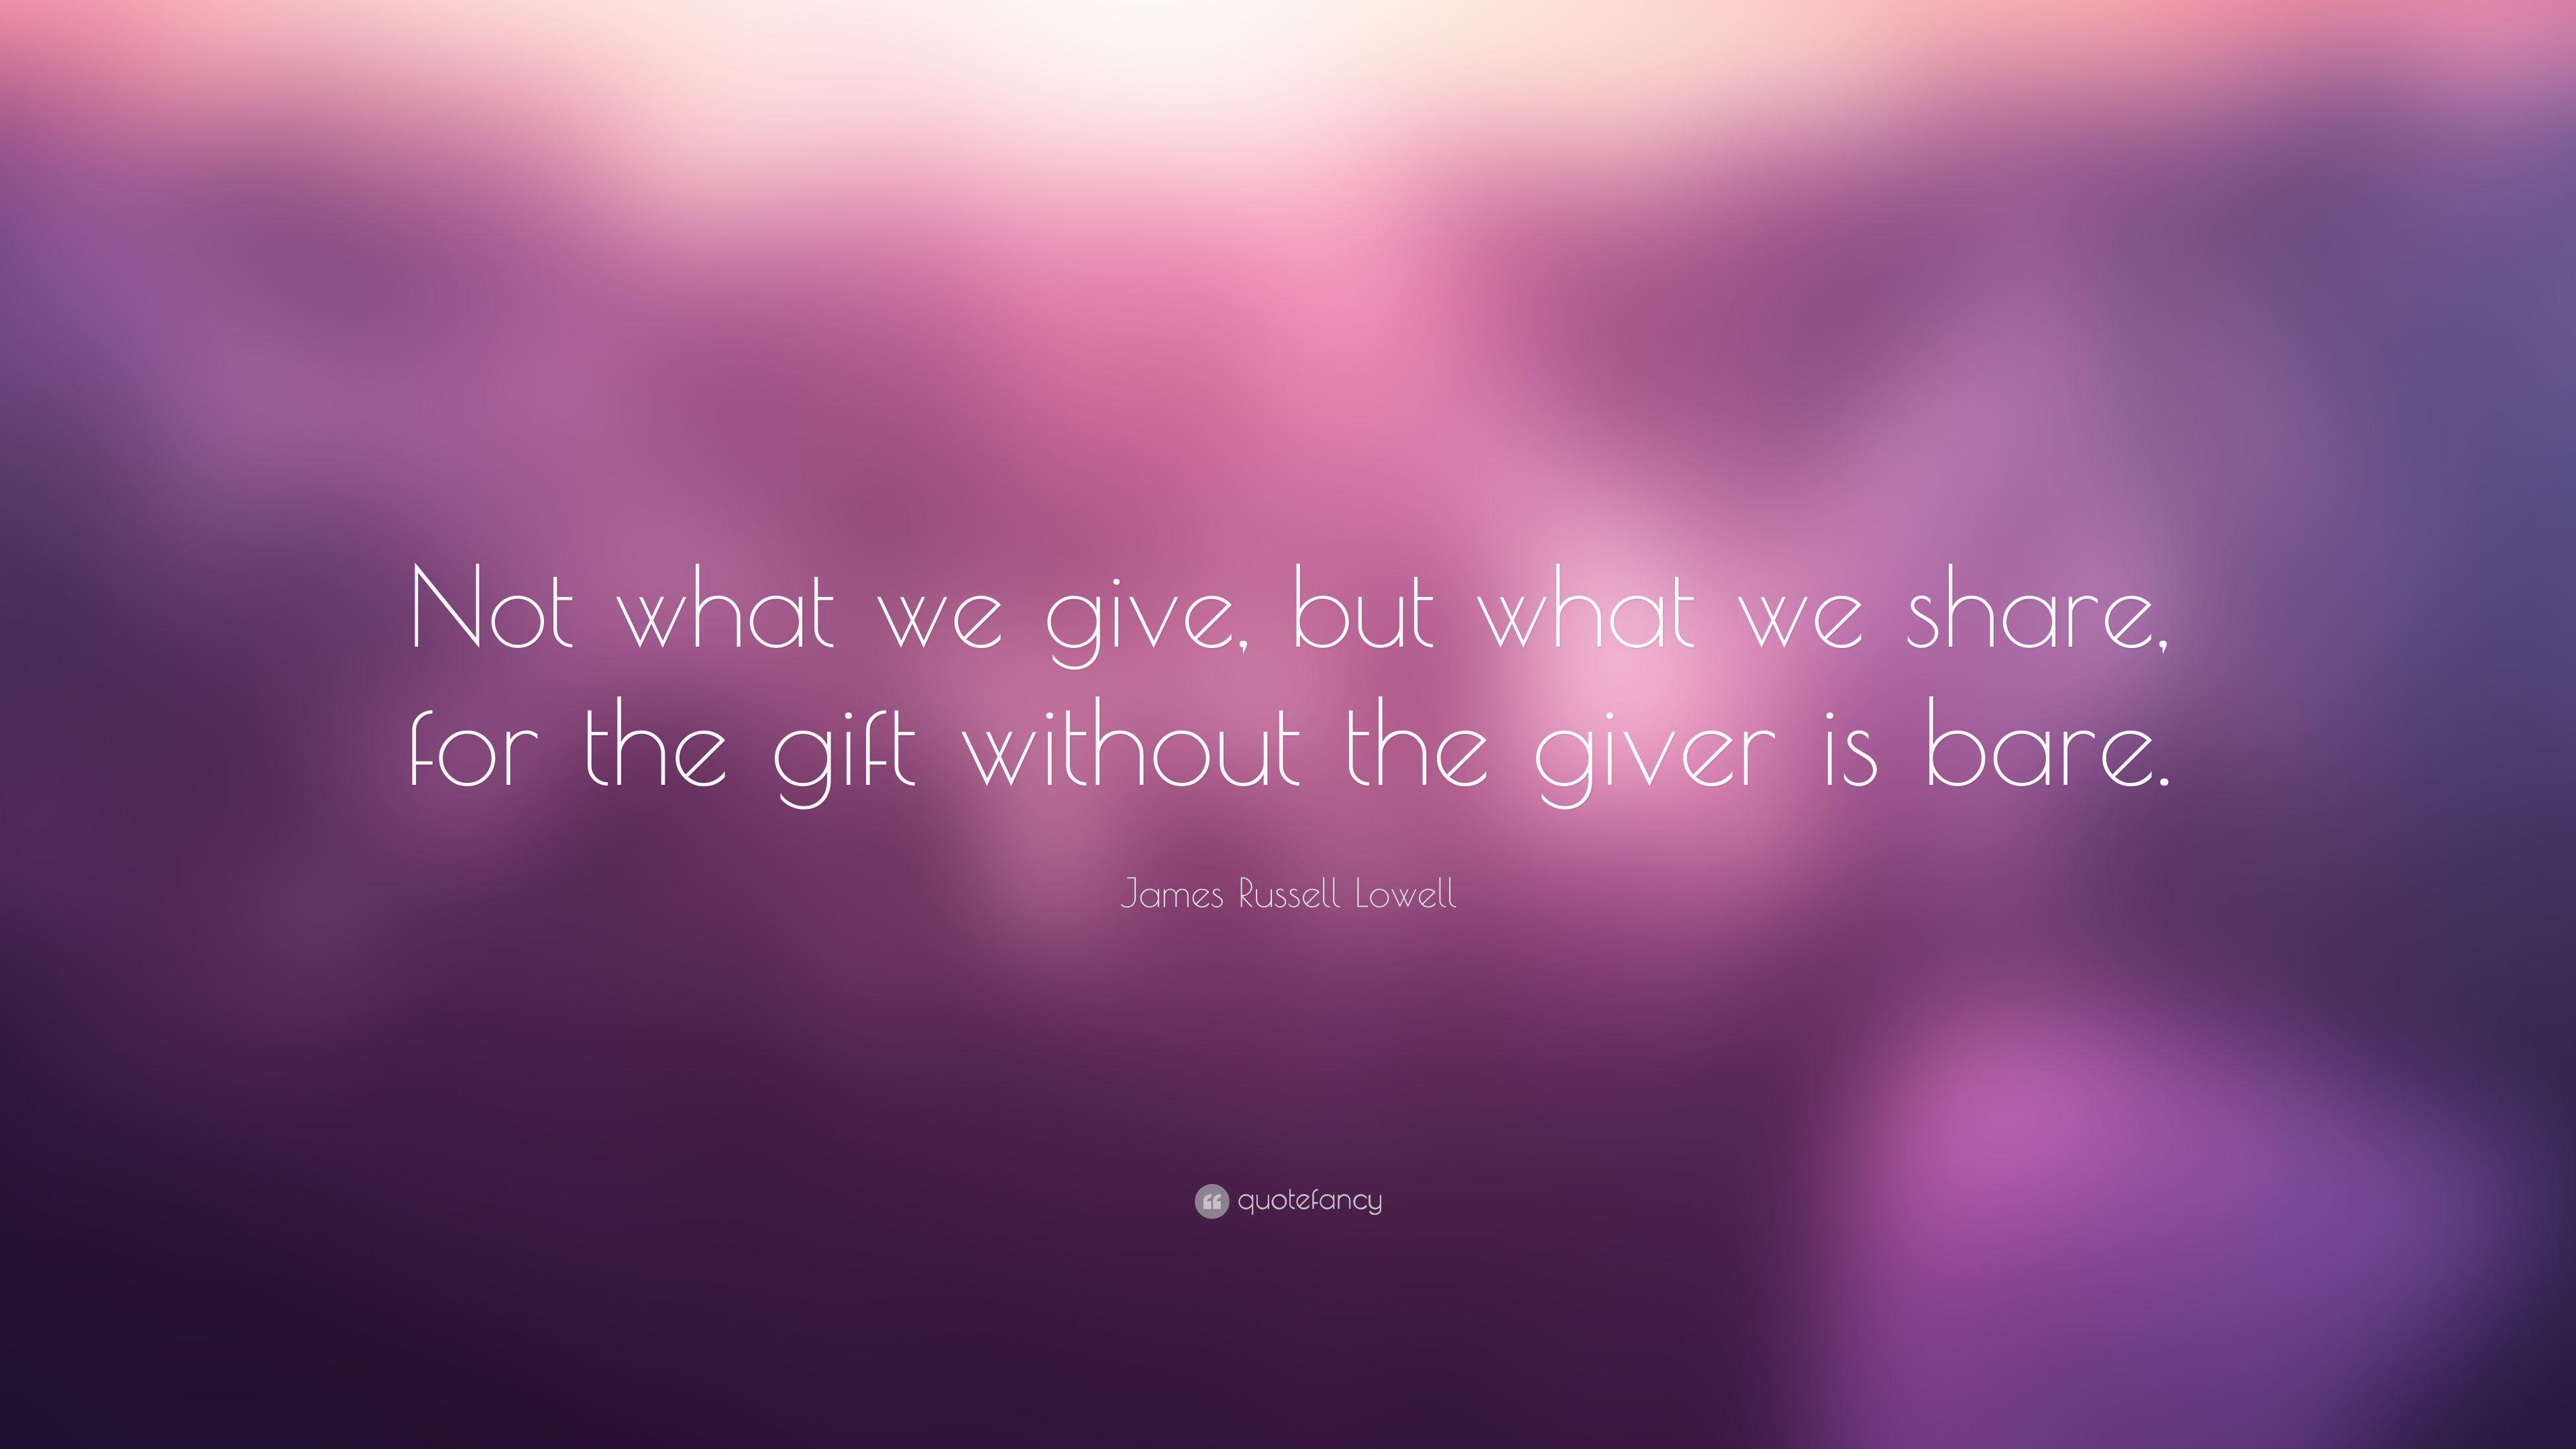 James Russell Lowell Quote: “Not what we give, but what we share